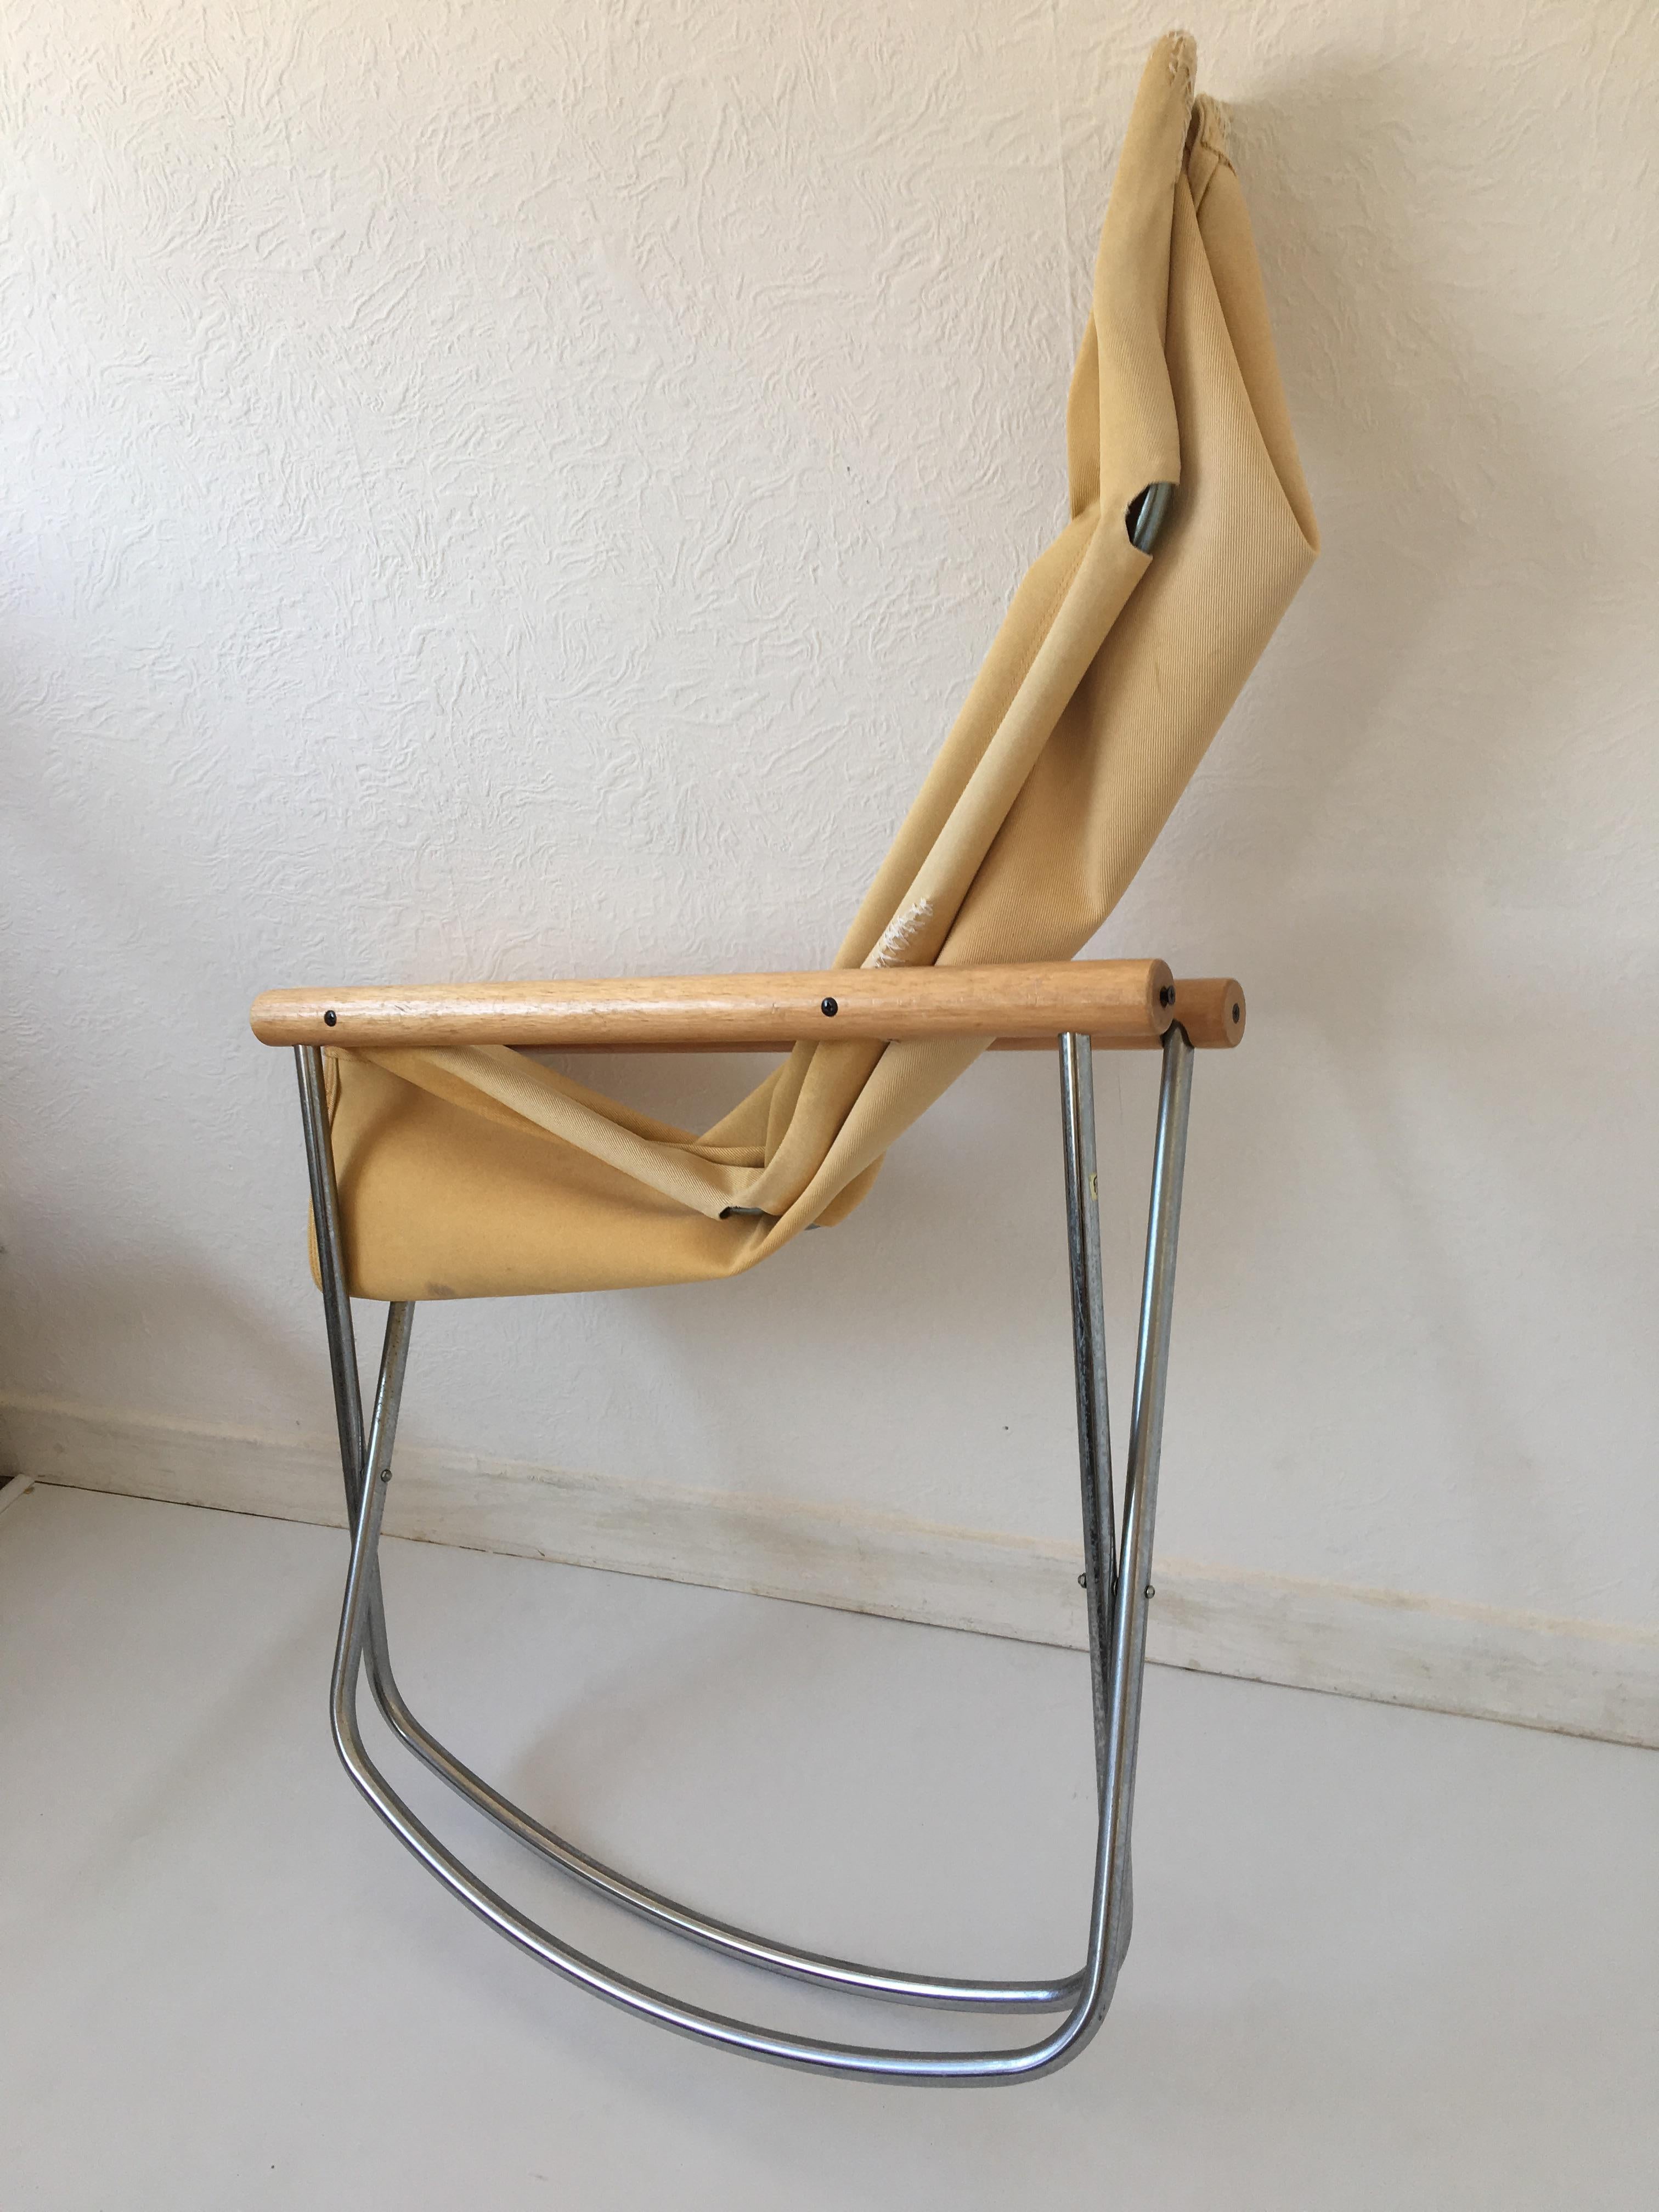 Midcentury Yellow Canvas 'NY' Chairs by Takeshi Nii, for Jox Interni, 1958 For Sale 2